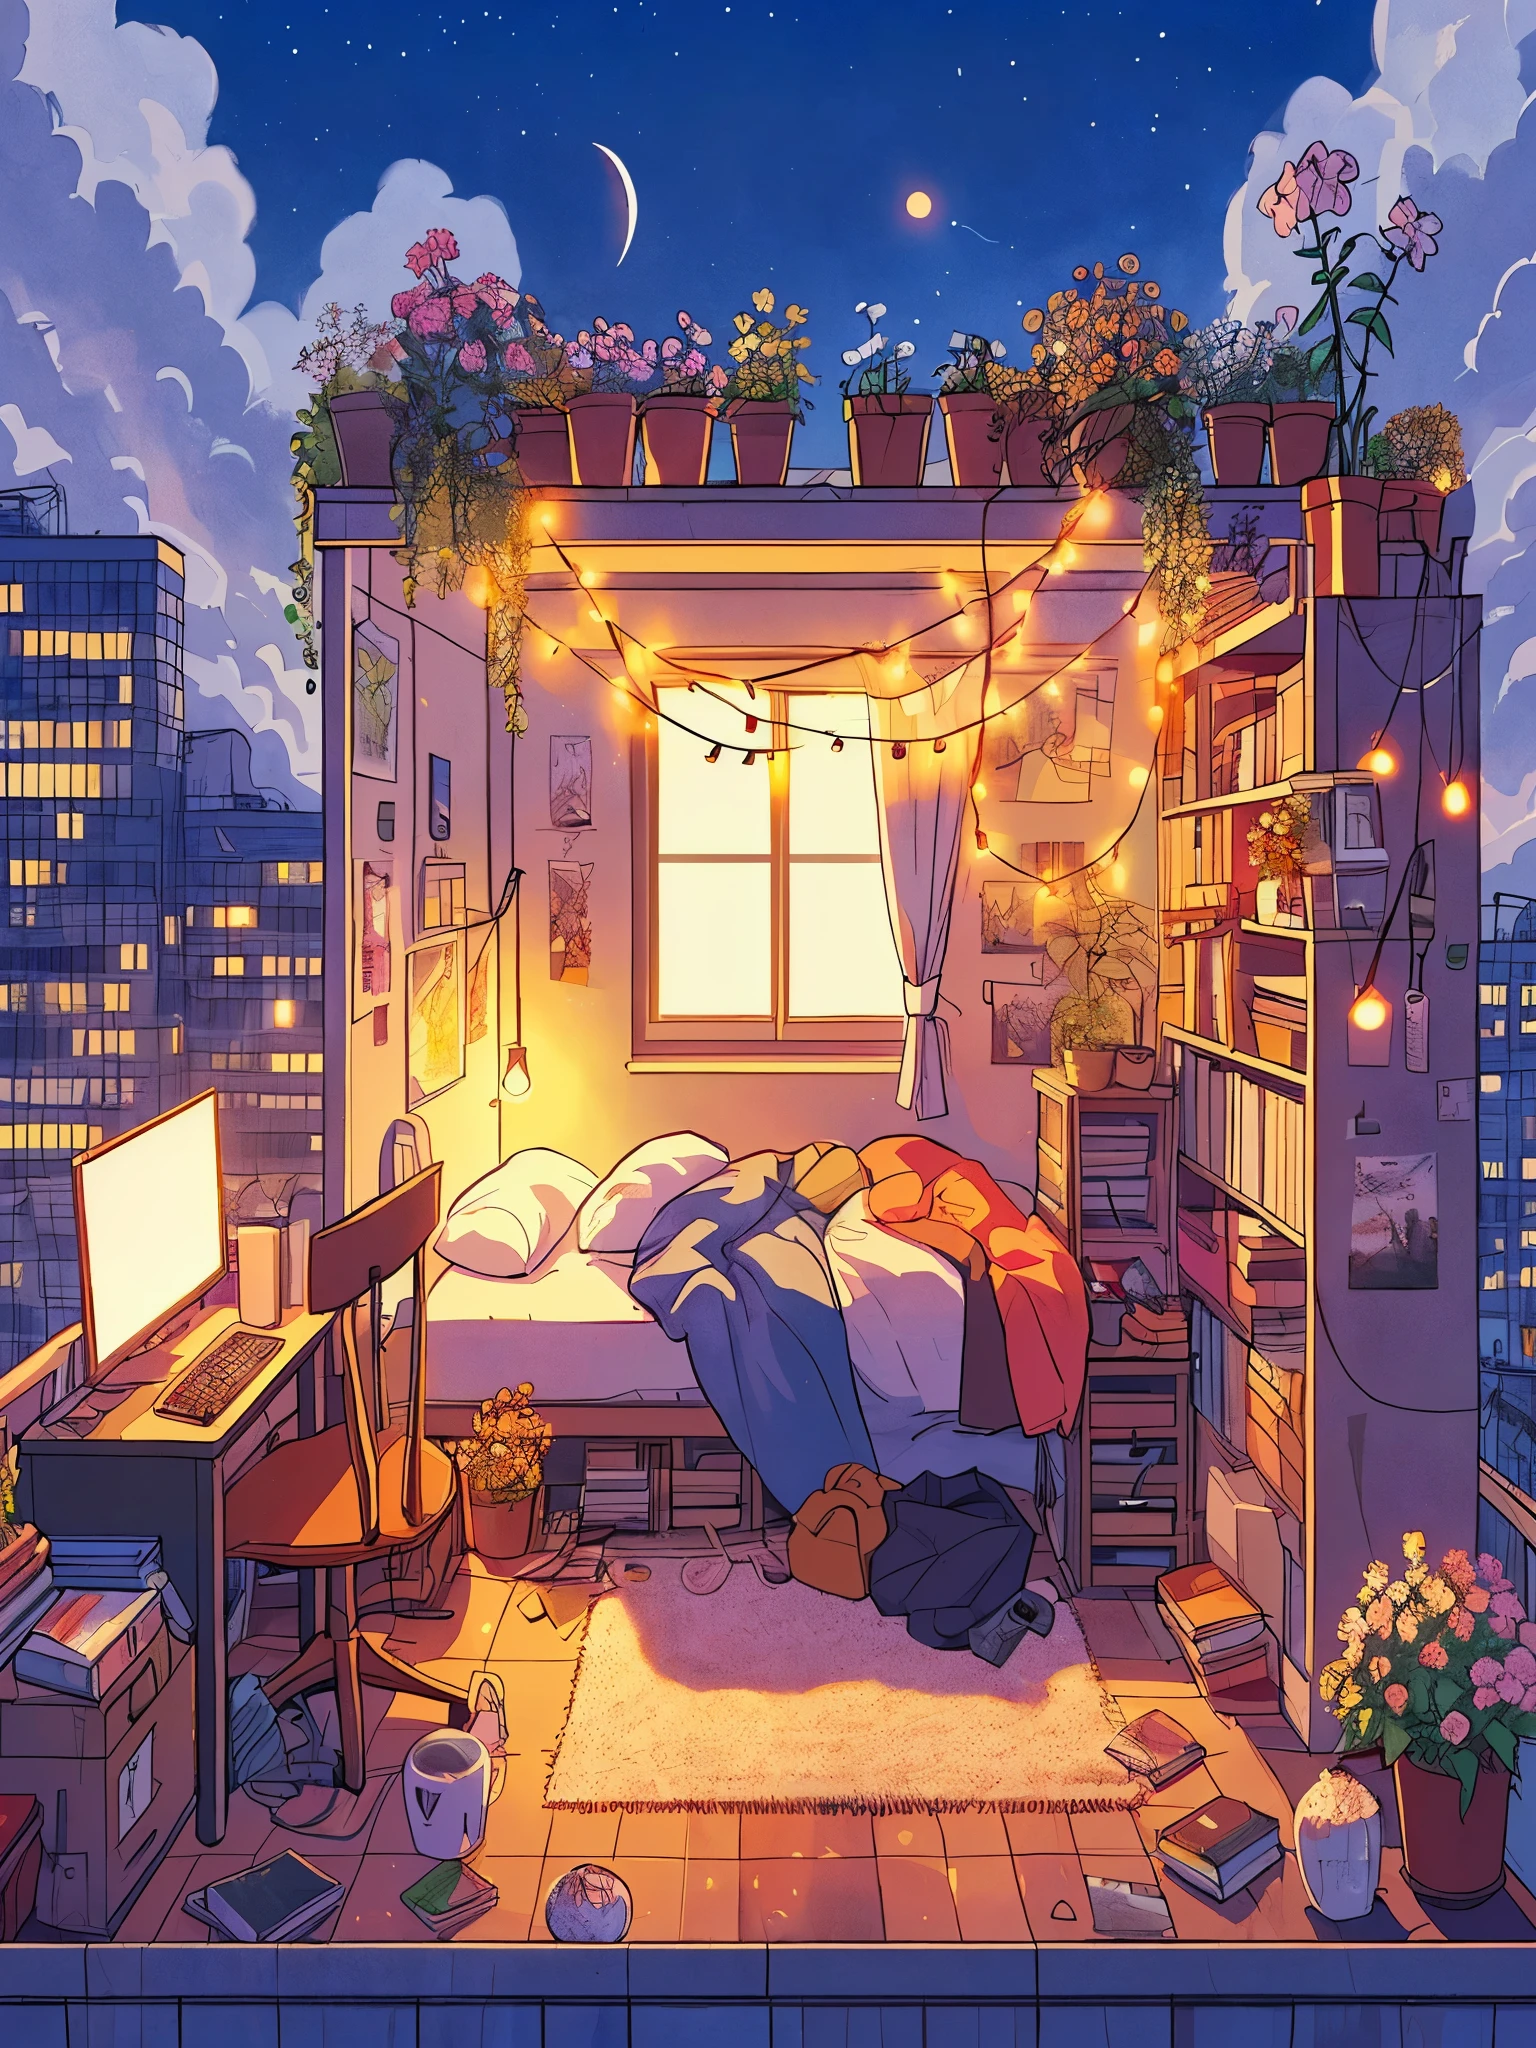 Draw an anime simple art scene of small cozy messy bedroom with fairylight on top floor of 21 storey building, colorful walls, flowers in pots, books in shelf, computer system, carpet, single light bulb hanging, late evening, cloudy sky, no human, vibrant color tones, dim light